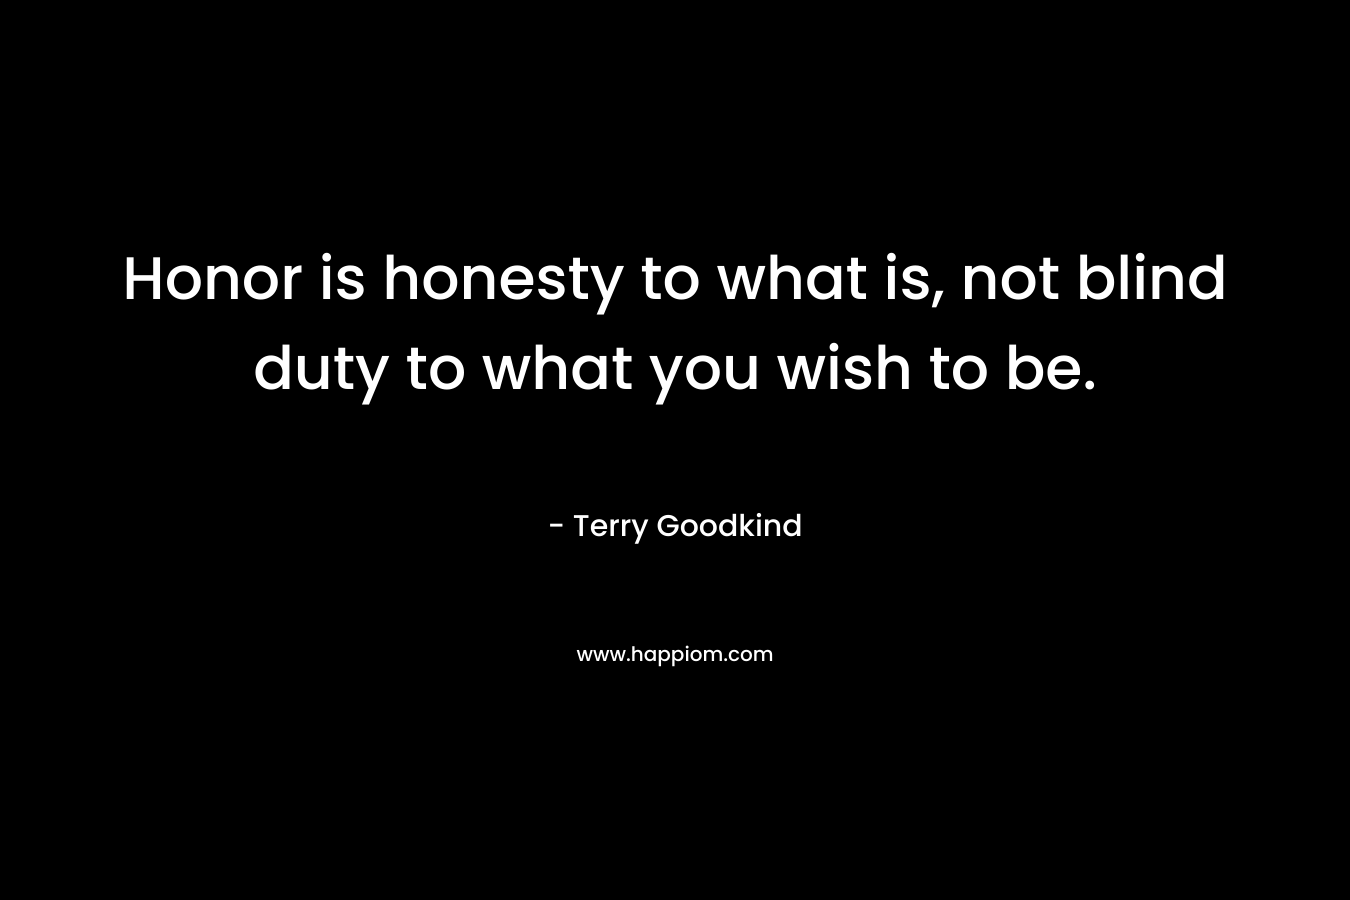 Honor is honesty to what is, not blind duty to what you wish to be. – Terry Goodkind